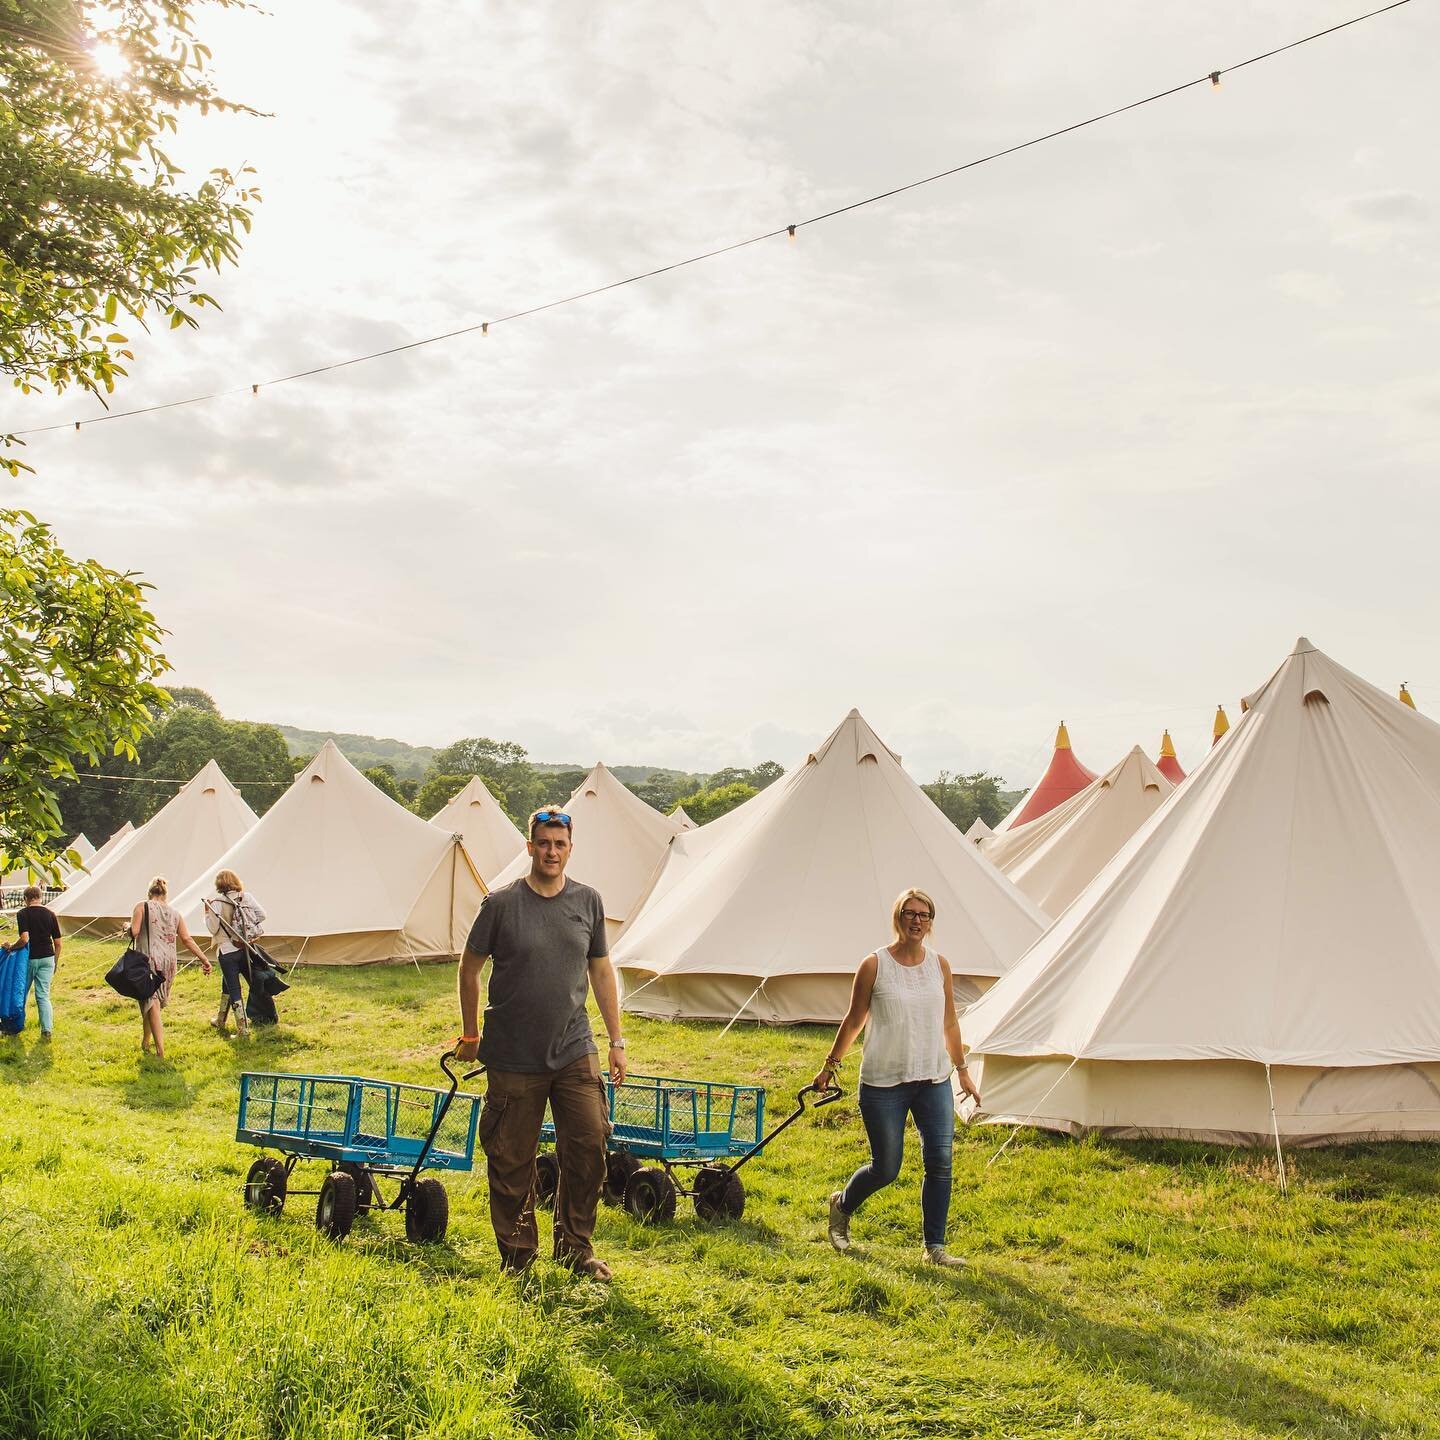 We are now on sale for Kite Festival! A first of its kind event, Hotel Bell Tent will be welcoming festival-goers with wonderfully comfortable accommodation for a 3 night stay.

Follow the link in our bio to book now! ⛺️ #hotelbelltent #glamping #kit